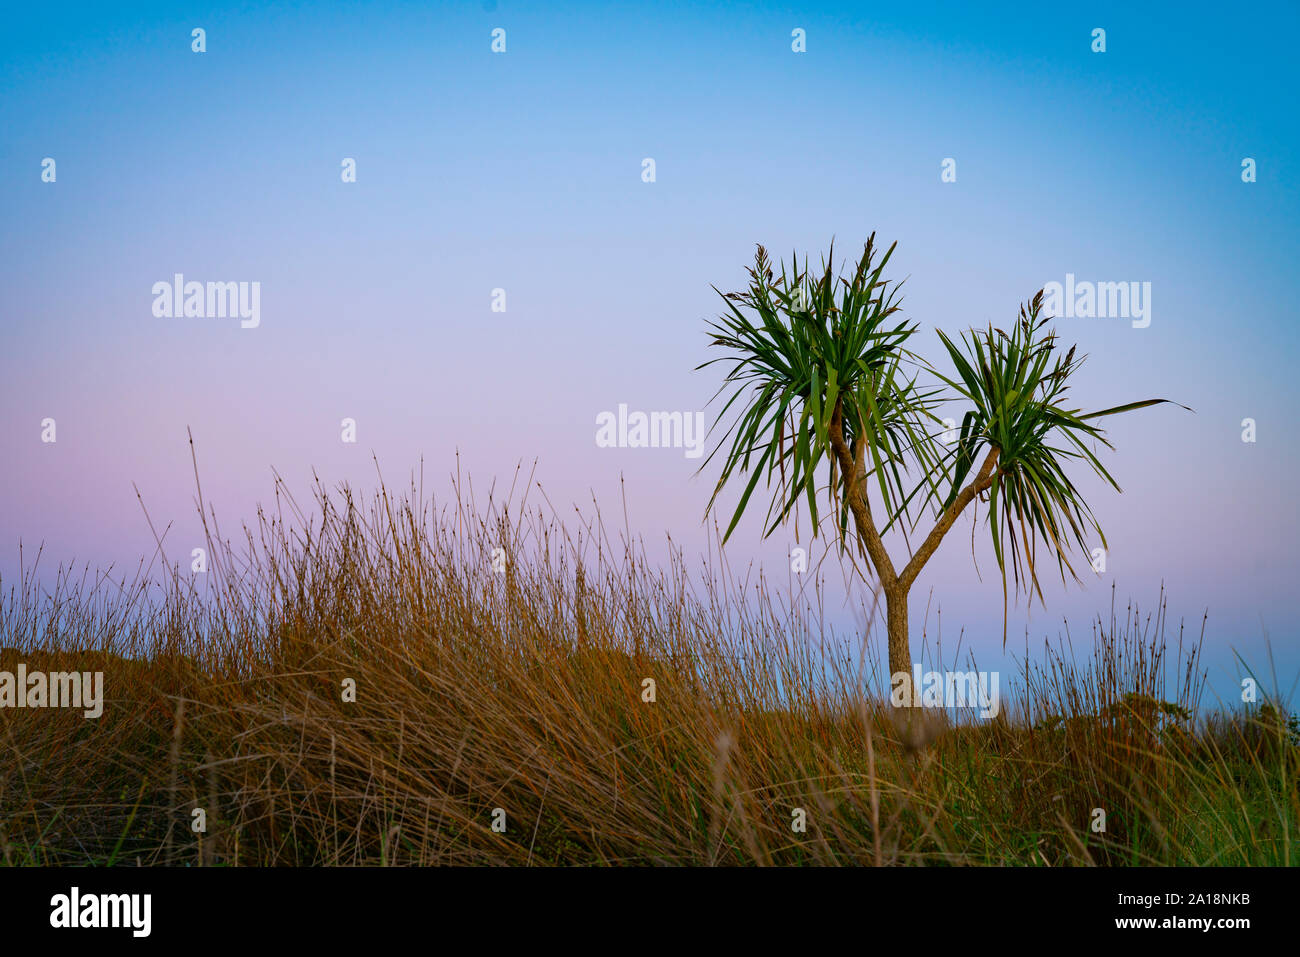 Dune landscape at dawn with beach vegetation of ficina and the New Zealand cabbage tree standing out against morning sky. Stock Photo